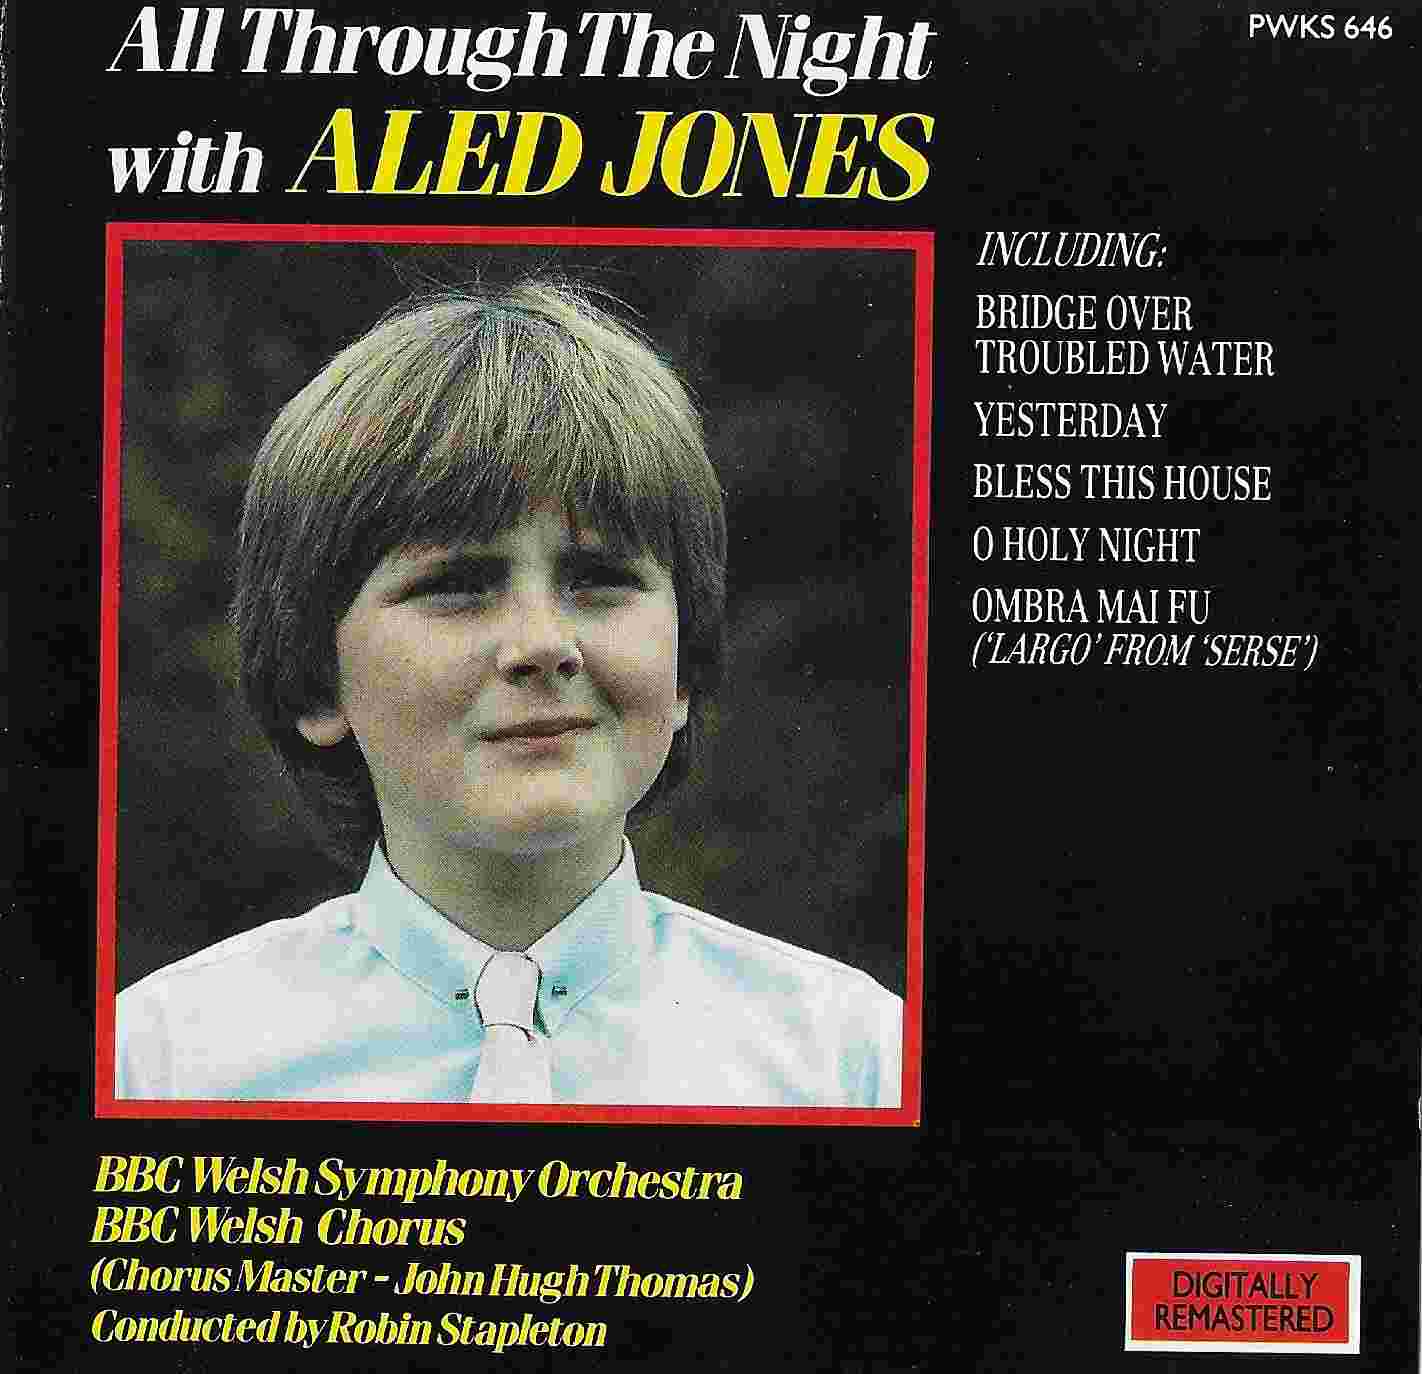 Picture of All through the night by artist Aled Jones from the BBC cds - Records and Tapes library